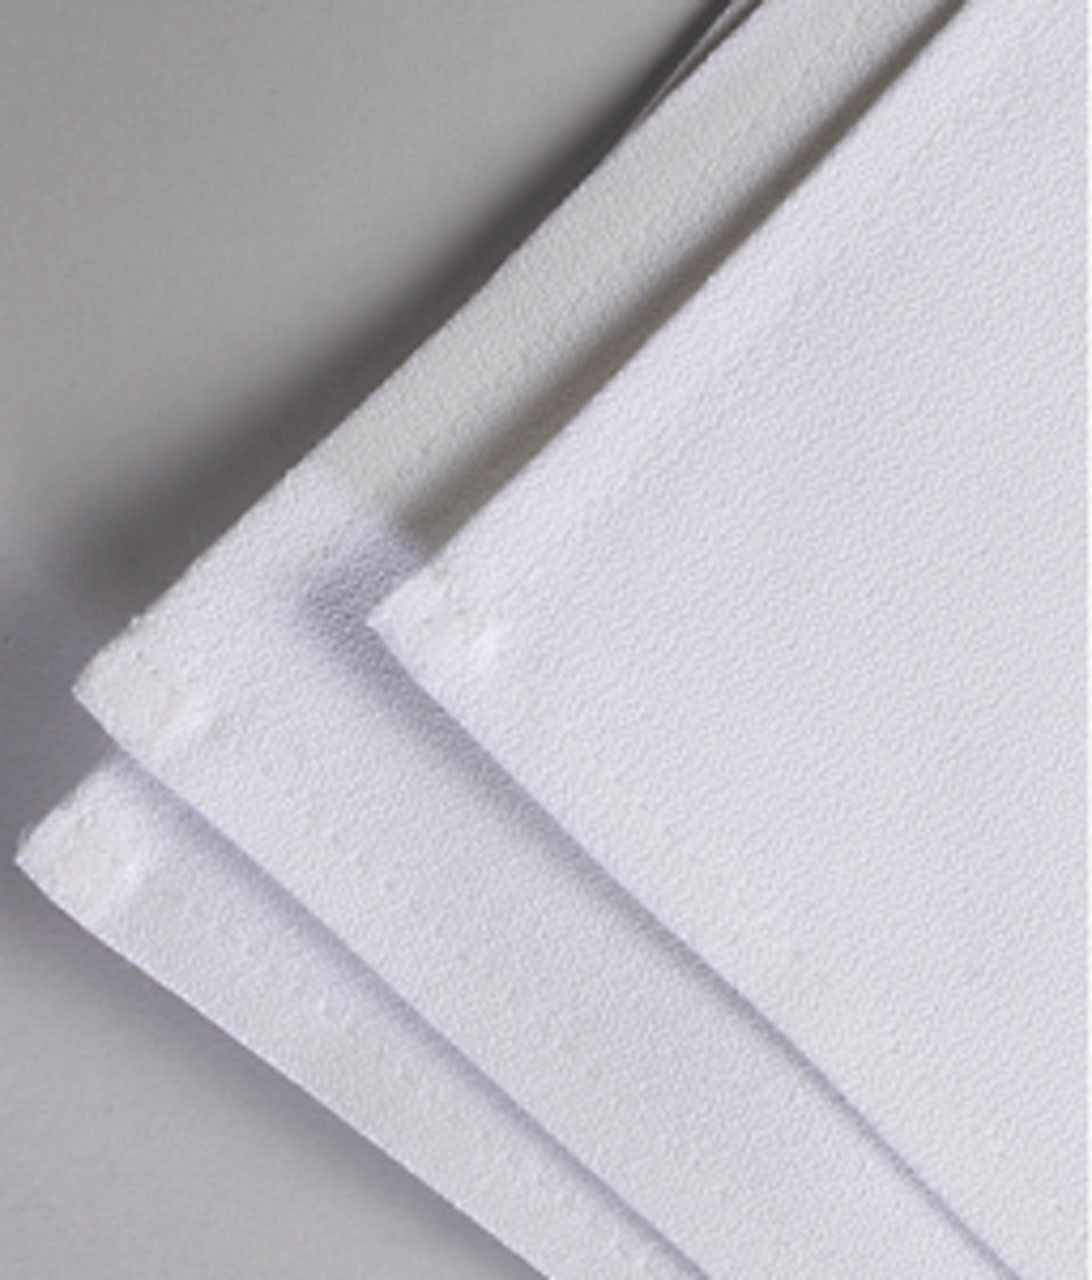 What can you say about the texture of the Cotton Momie Square Table Linens?